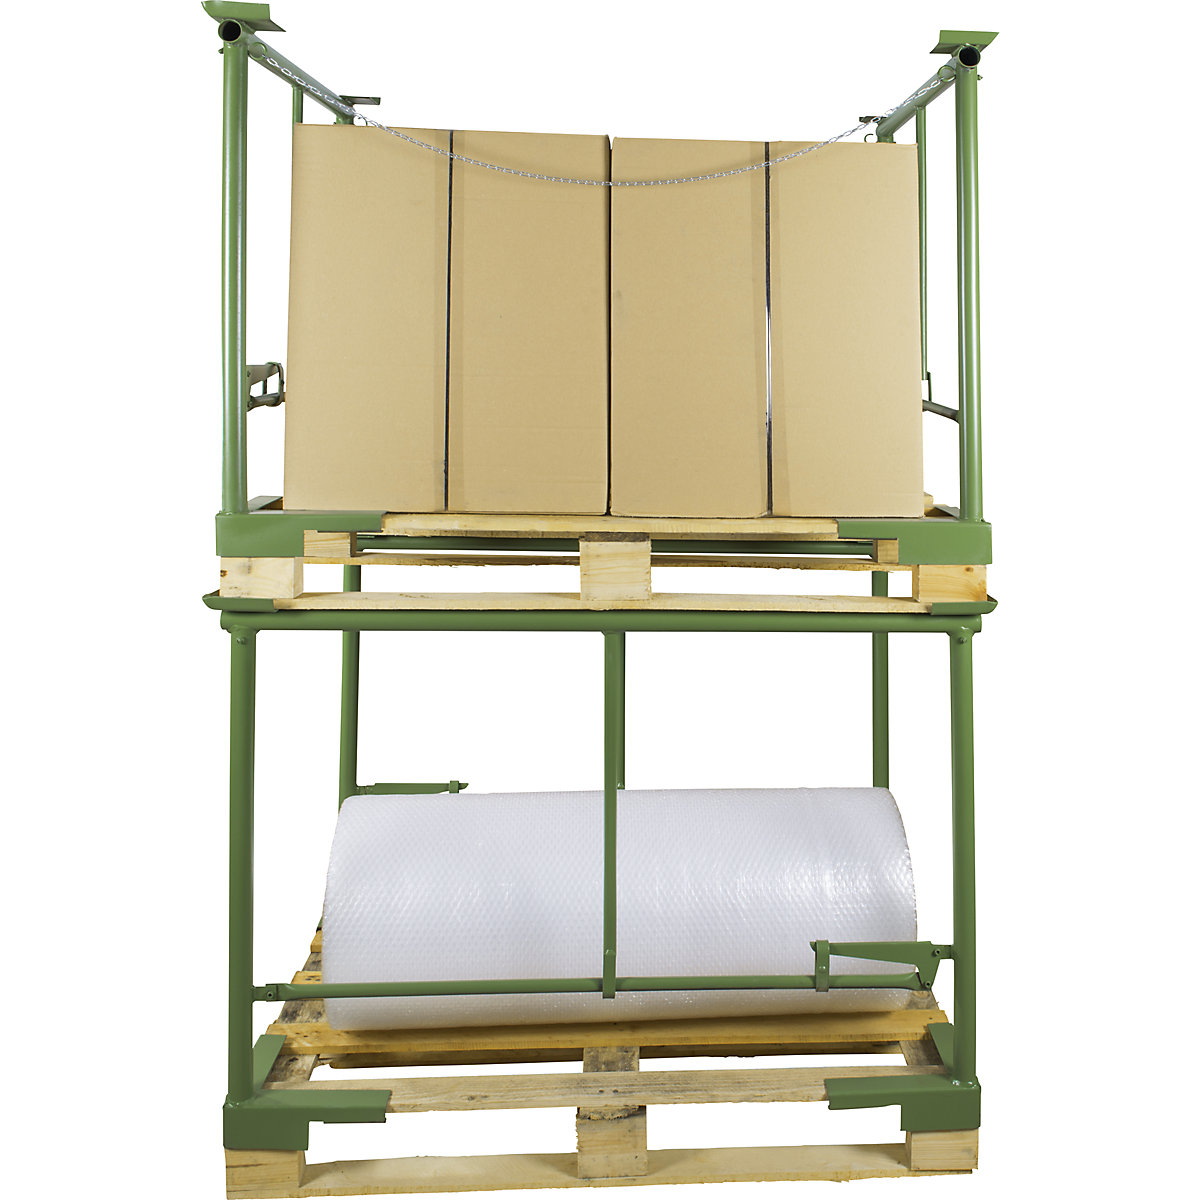 Clamp-on stacking frame (Product illustration 2)-1